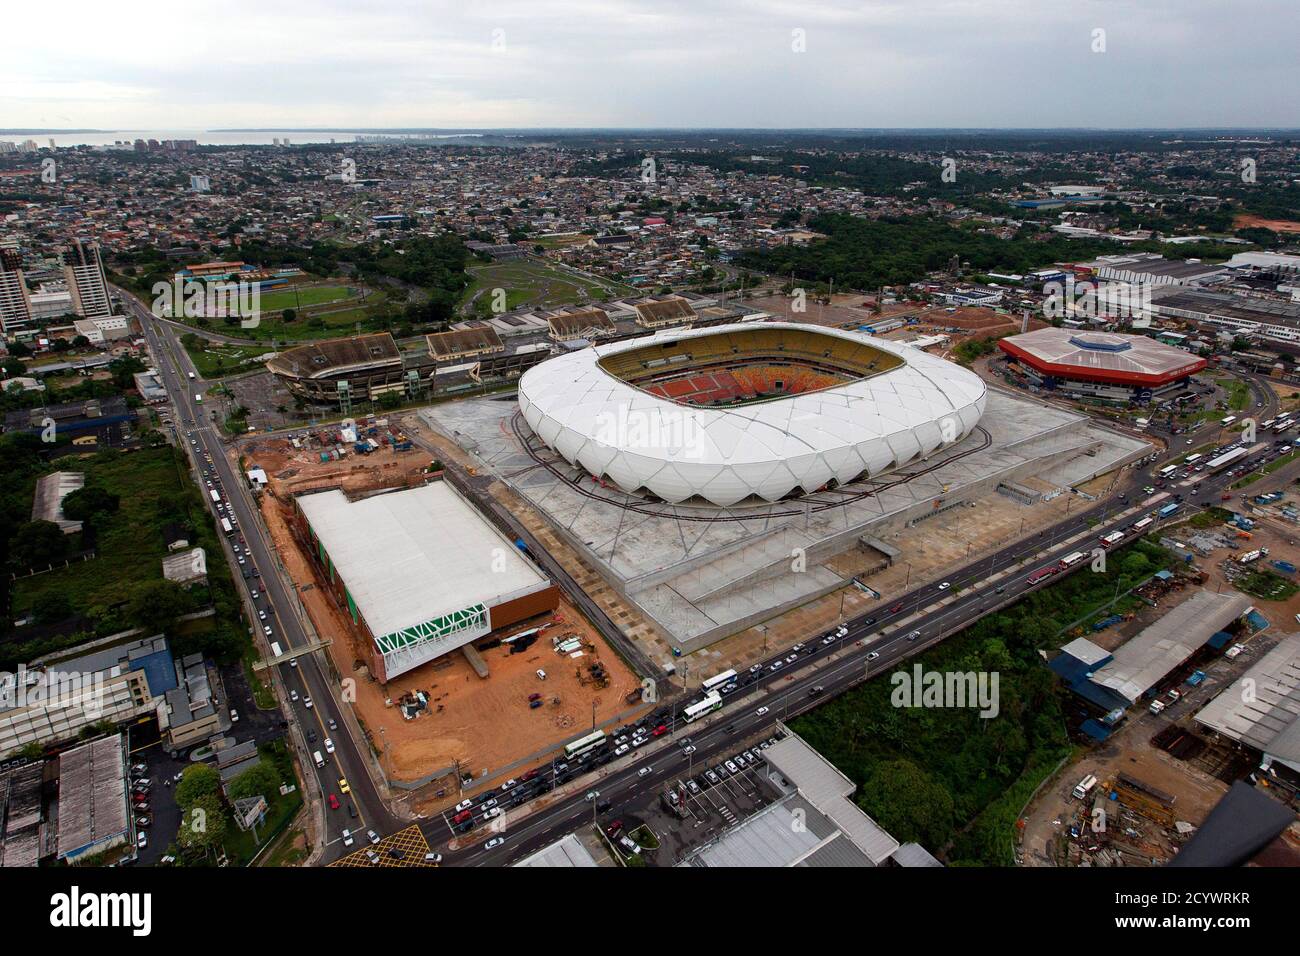 Page 2 - Arena Amazonia High Resolution Stock Photography and Images - Alamy